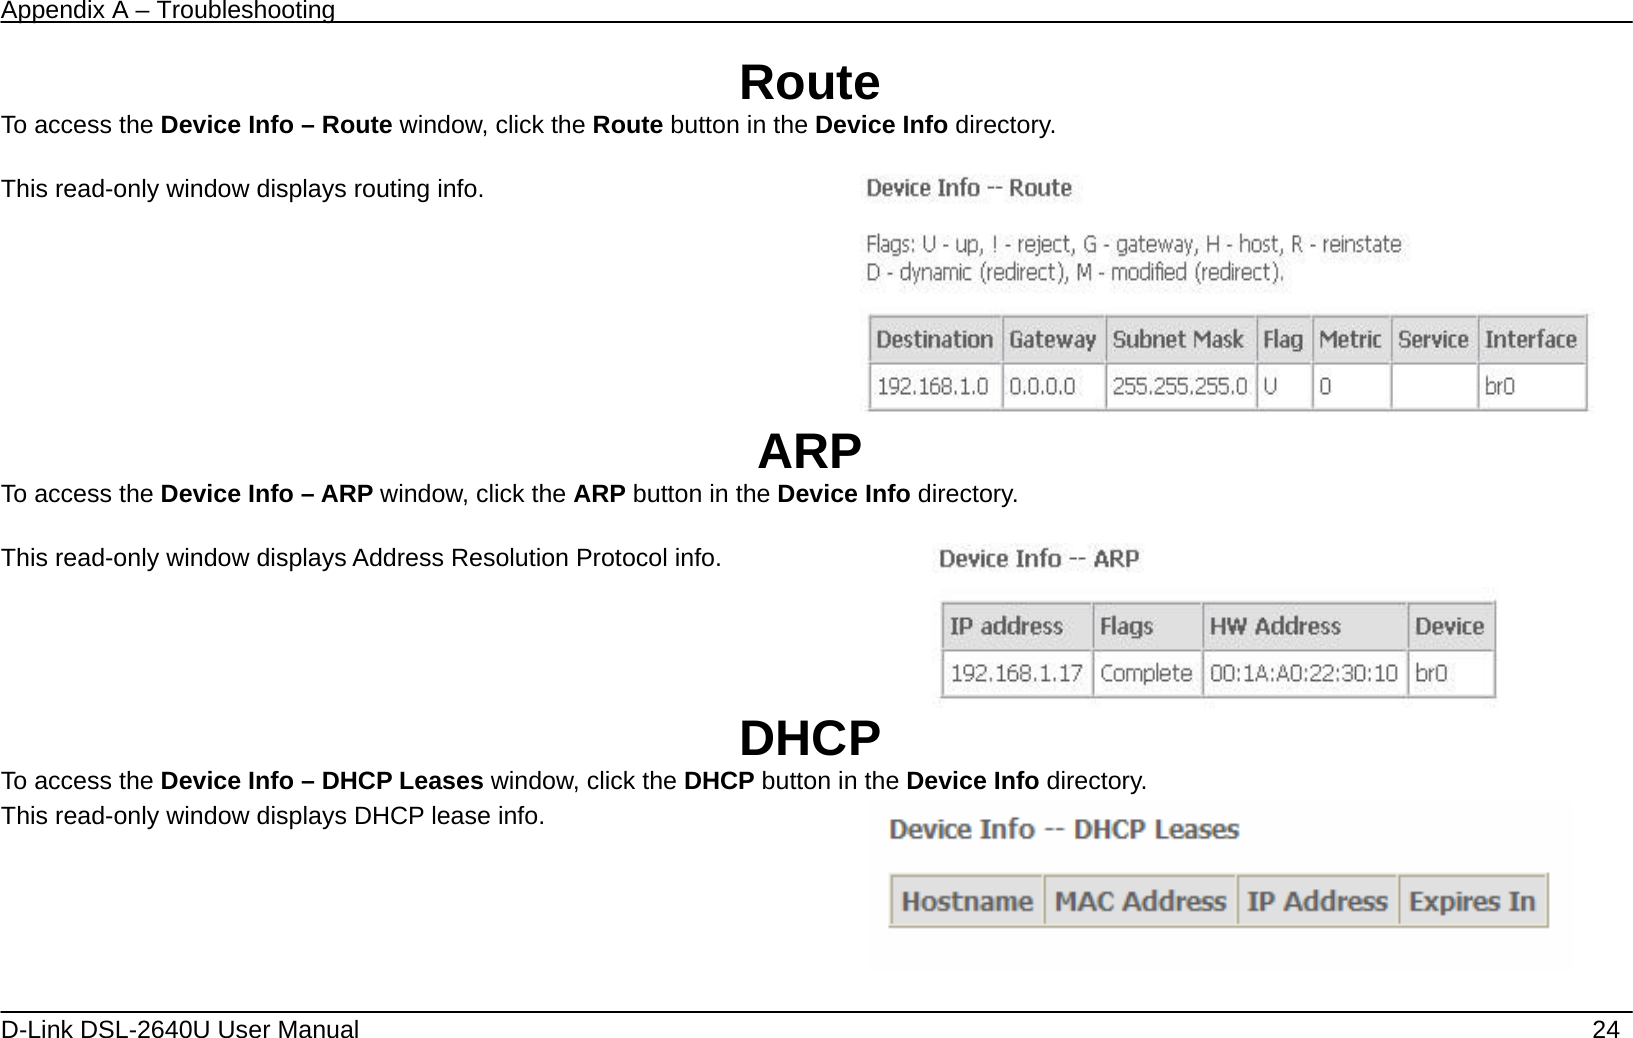 Appendix A – Troubleshooting   D-Link DSL-2640U User Manual    24 Route To access the Device Info – Route window, click the Route button in the Device Info directory.  This read-only window displays routing info.     ARP To access the Device Info – ARP window, click the ARP button in the Device Info directory.  This read-only window displays Address Resolution Protocol info.   DHCP To access the Device Info – DHCP Leases window, click the DHCP button in the Device Info directory. This read-only window displays DHCP lease info.    